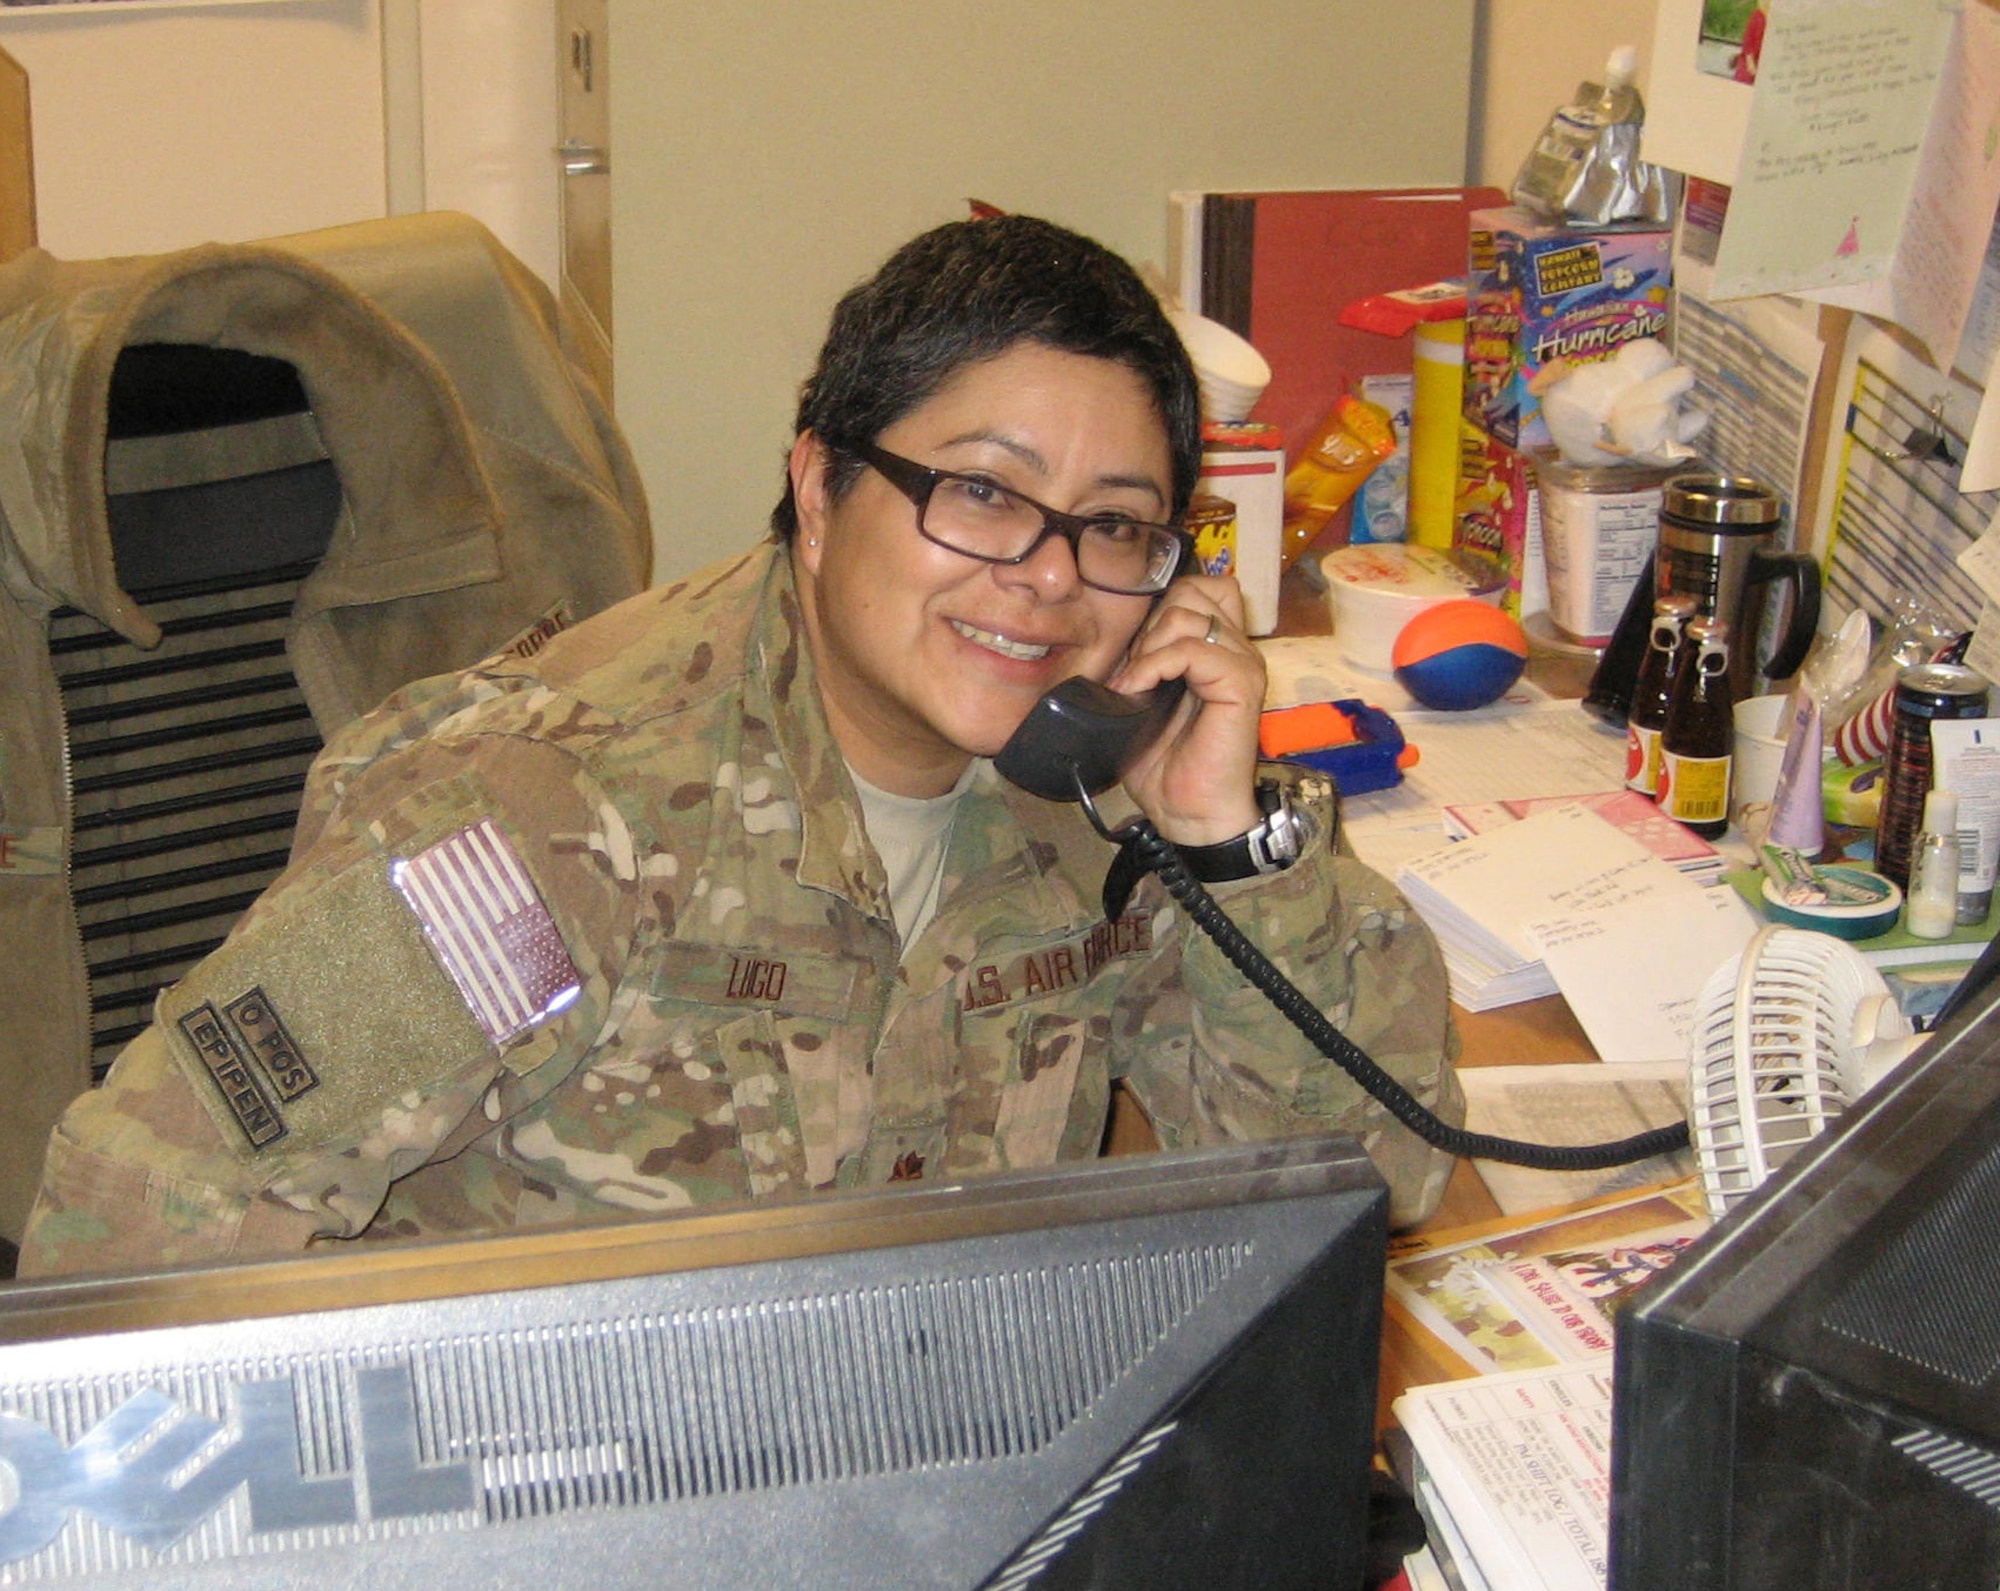 Maj. Carla Lugo receives a phone call from Secretary of the Air Force Deborah Lee James, Dec. 31, 2013 at Bagram Airfield, Afghanistan. The secretary called to wish deployed Airmen a happy new year and let them know the Air Force leadership team was thinking about them and their families. Lugo is a native of Flagstaff, Ariz. (Courtesy Photo)